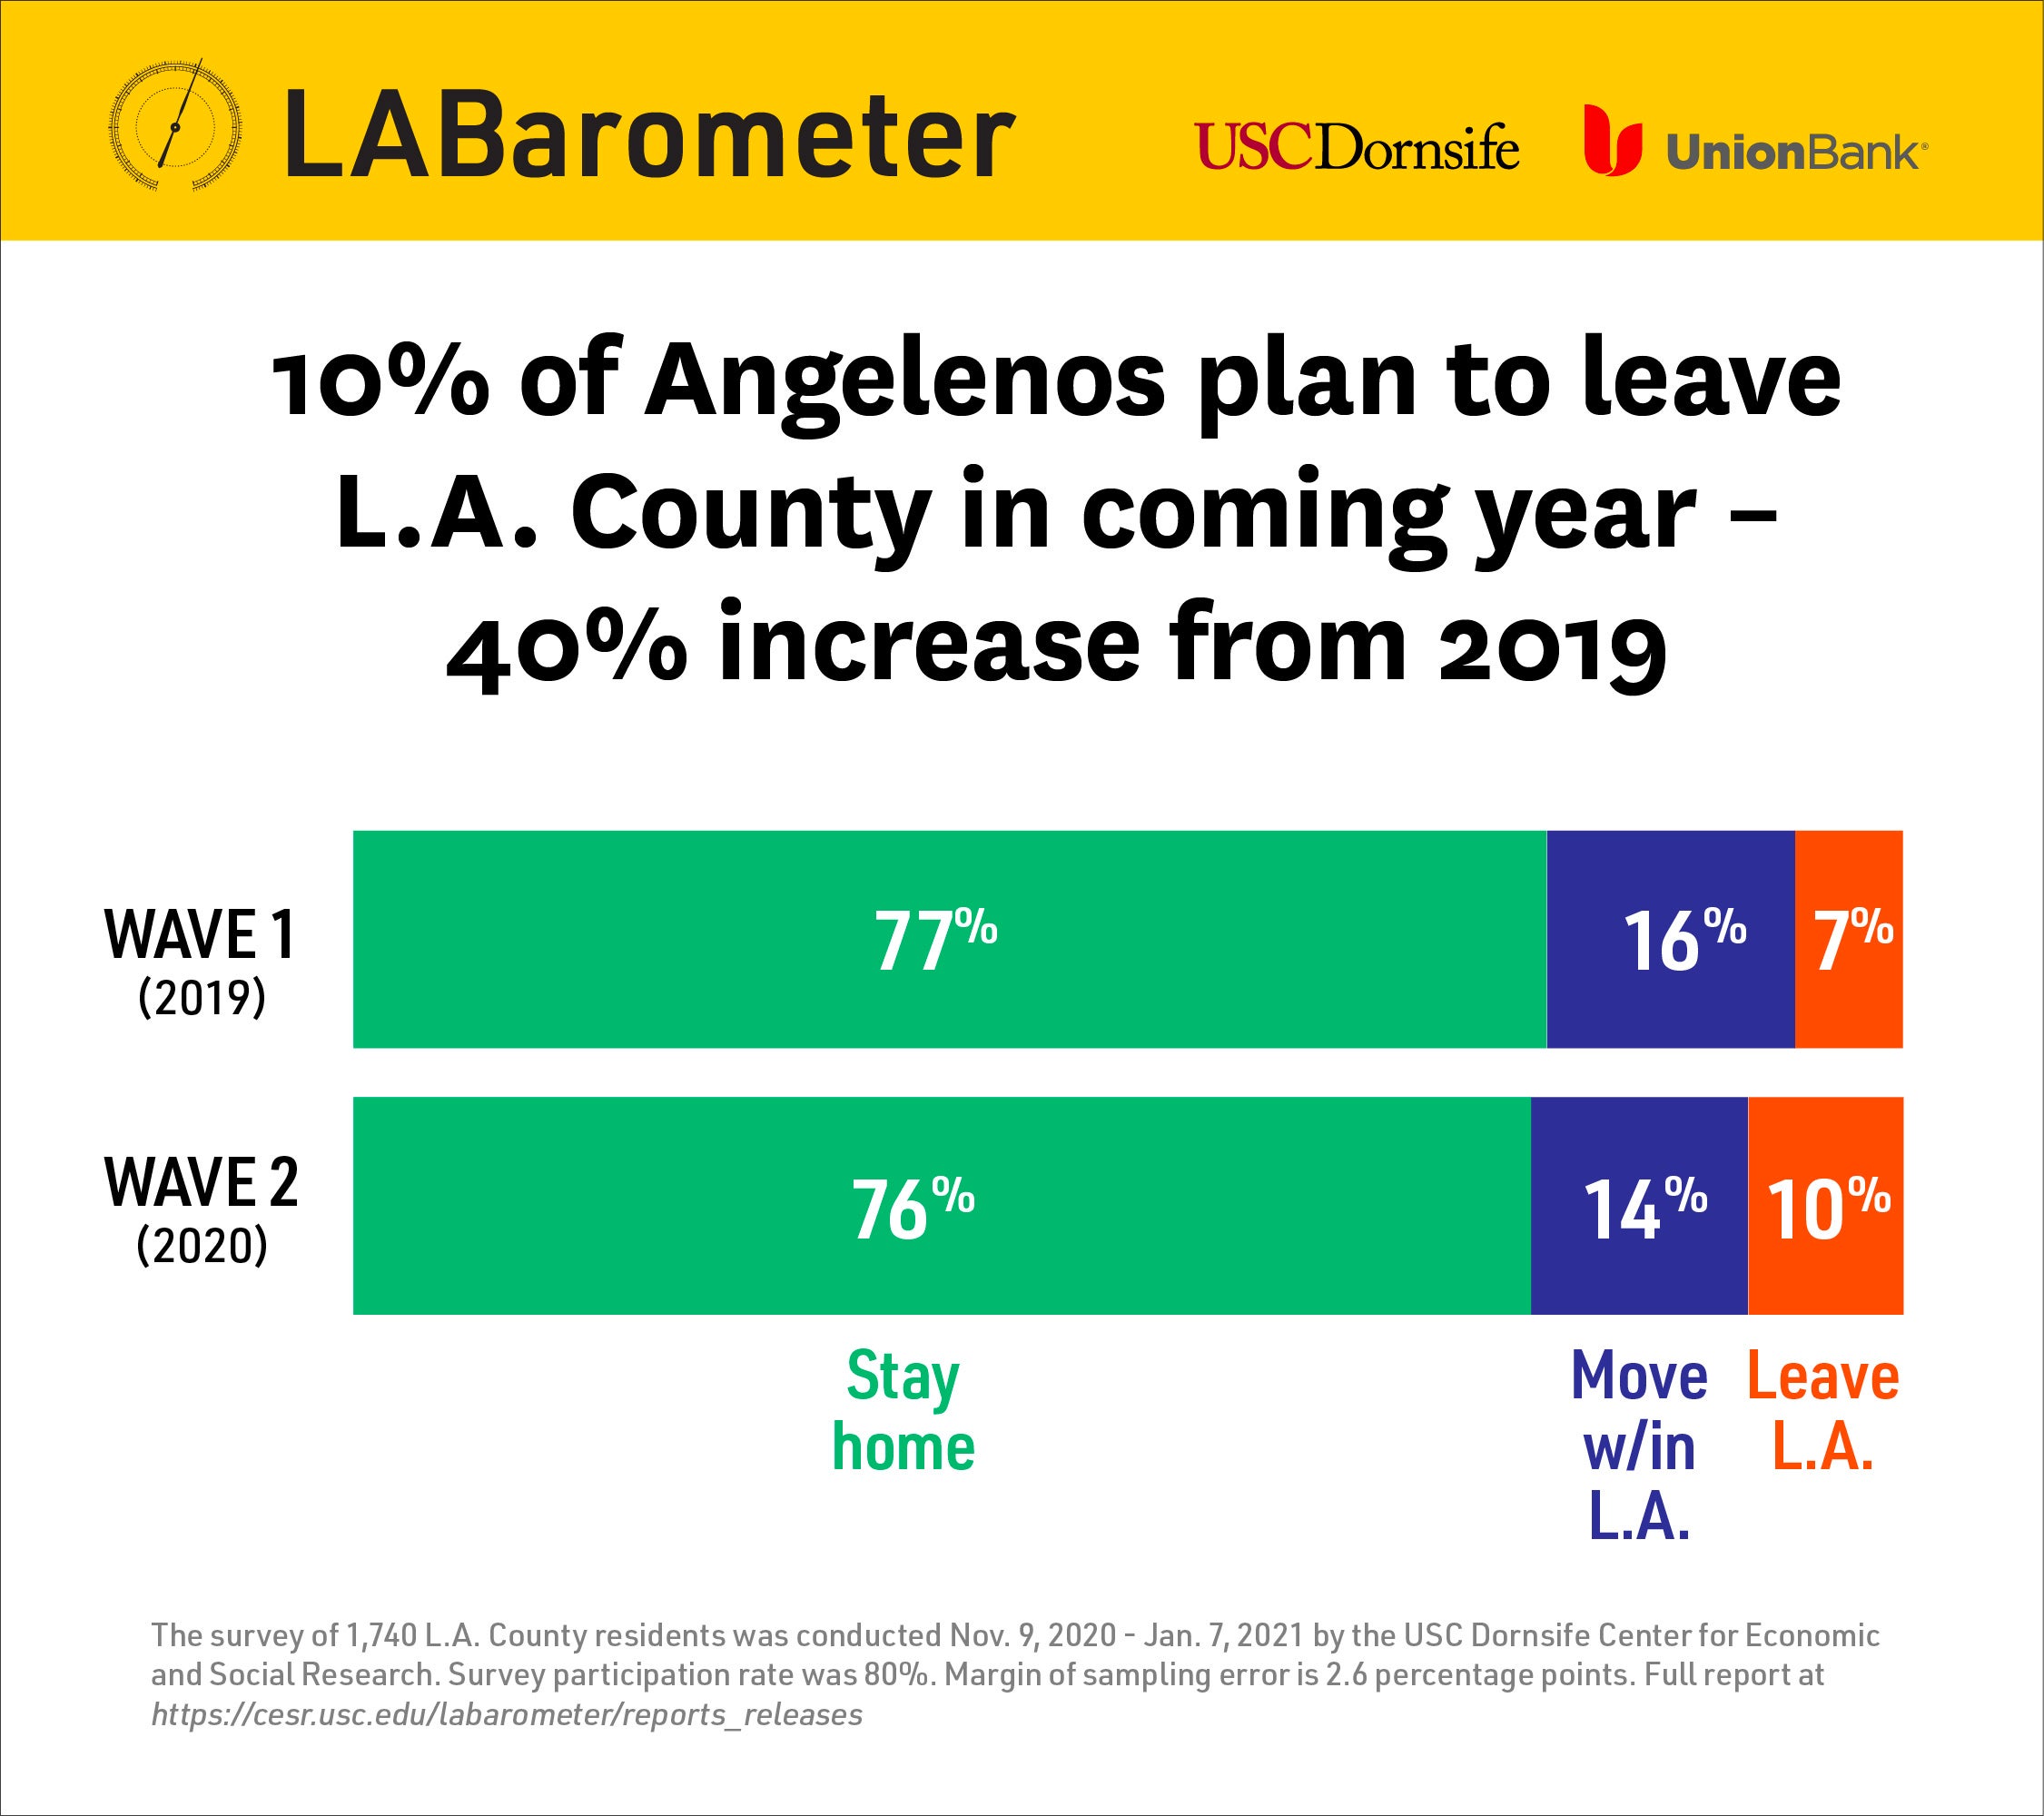 Bar graph shows 10% of L.A. residents plan to leave L.A. County this year, a 40% increase over 2019